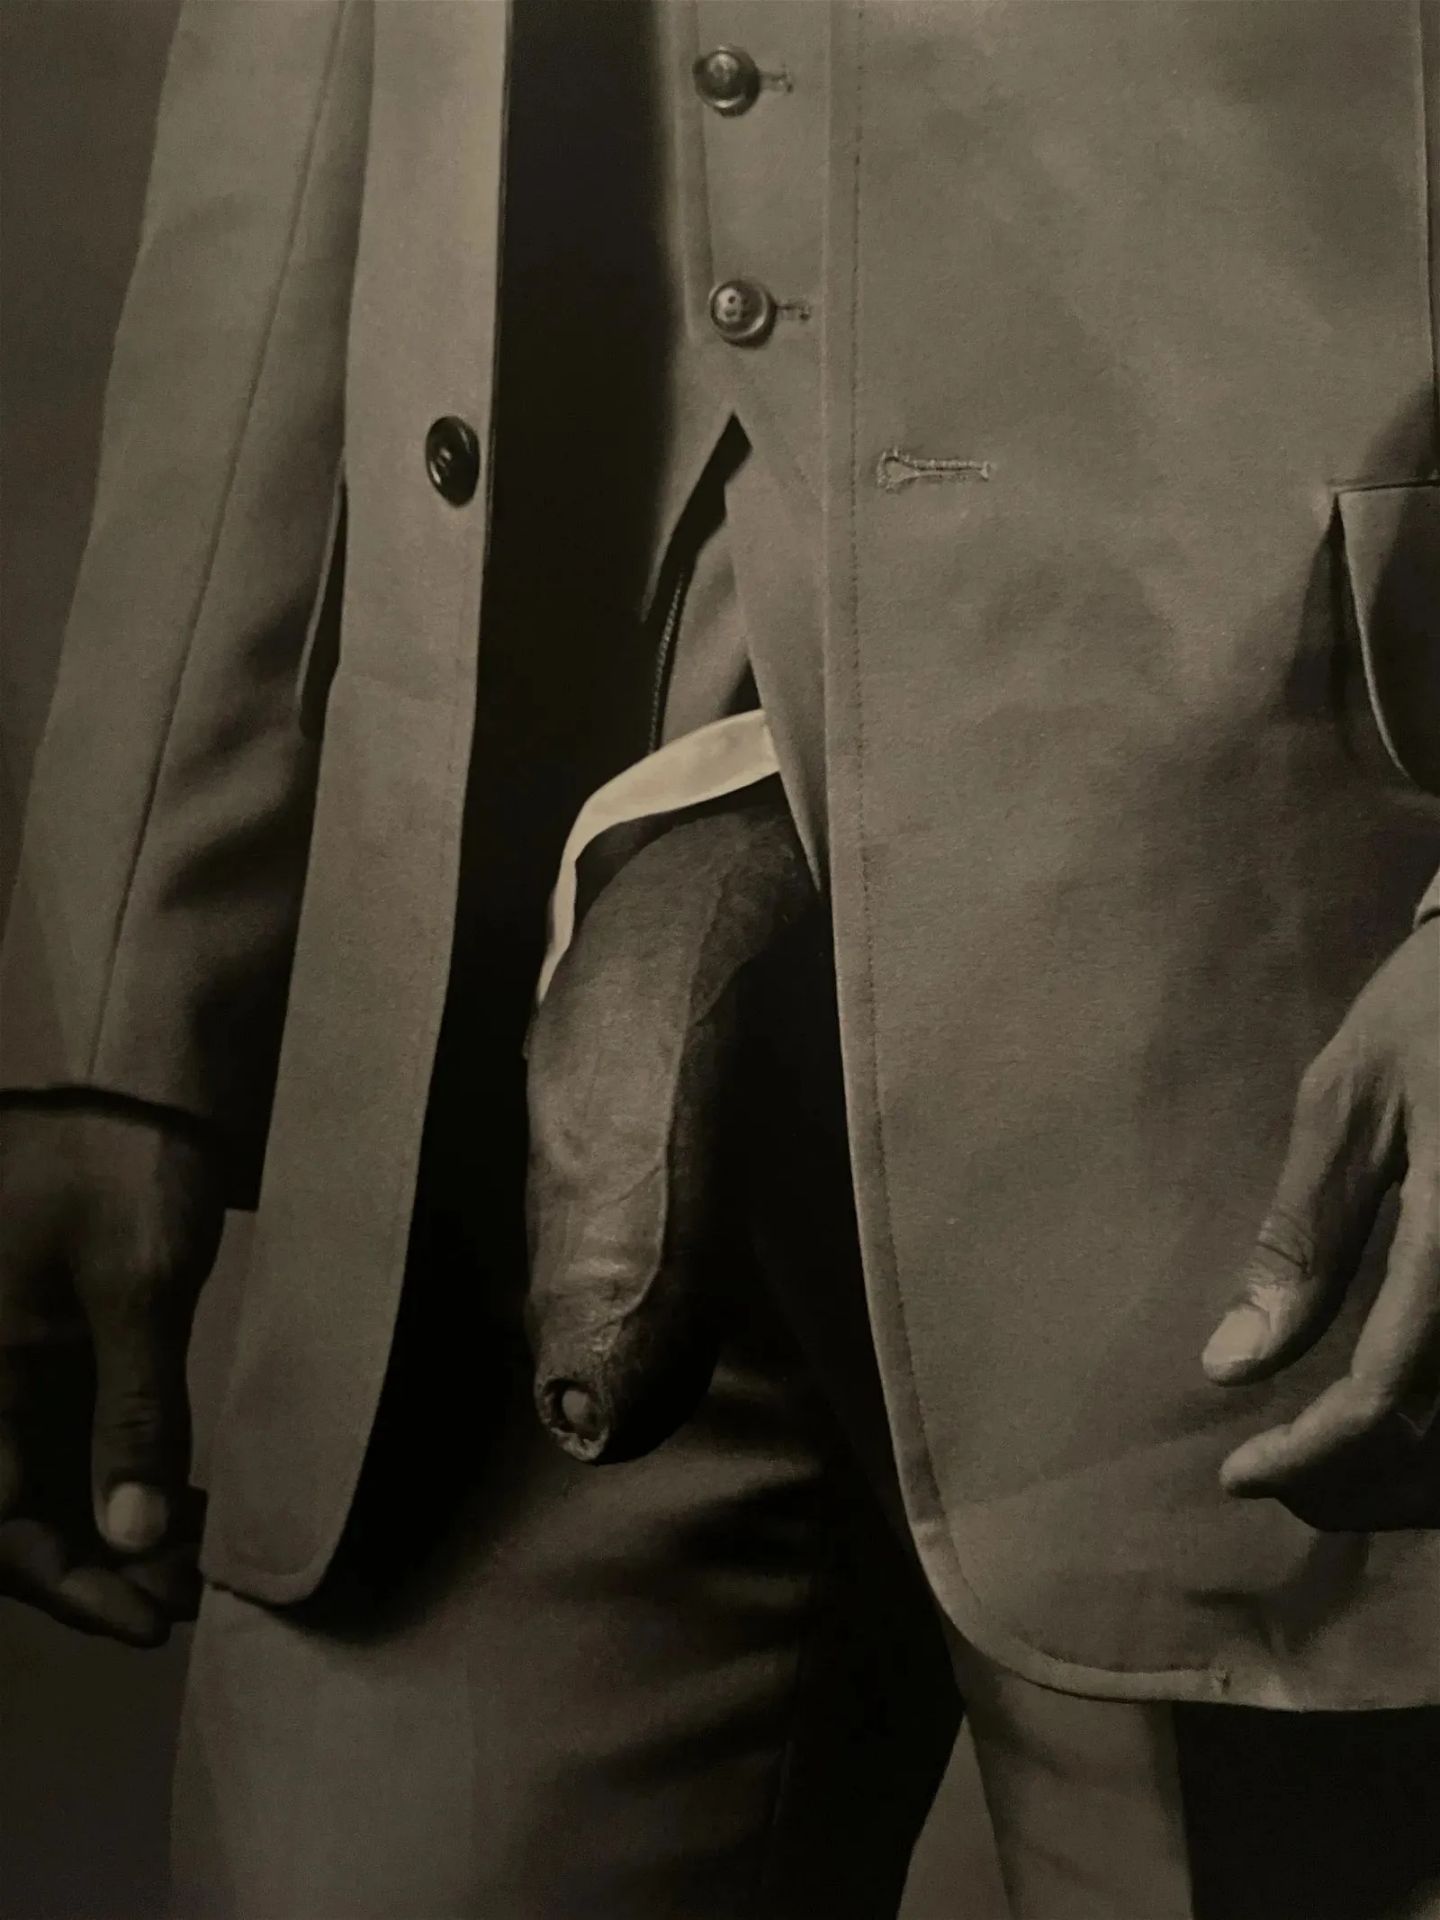 Robert Mapplethorpe "Man in Polyester Suit, 1980s" Print - Image 2 of 5